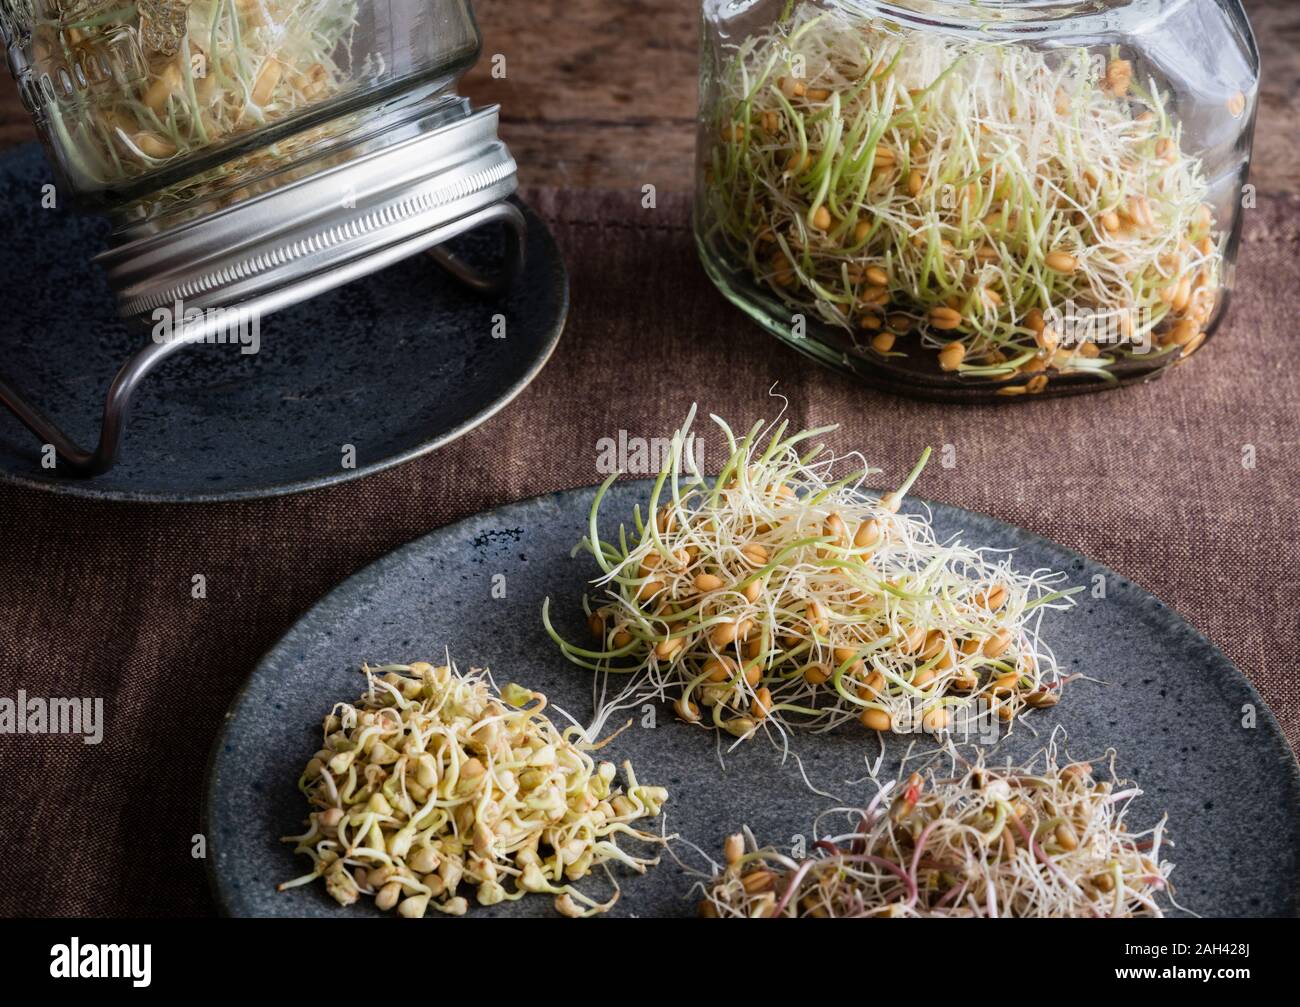 Plate with various sprouts Stock Photo